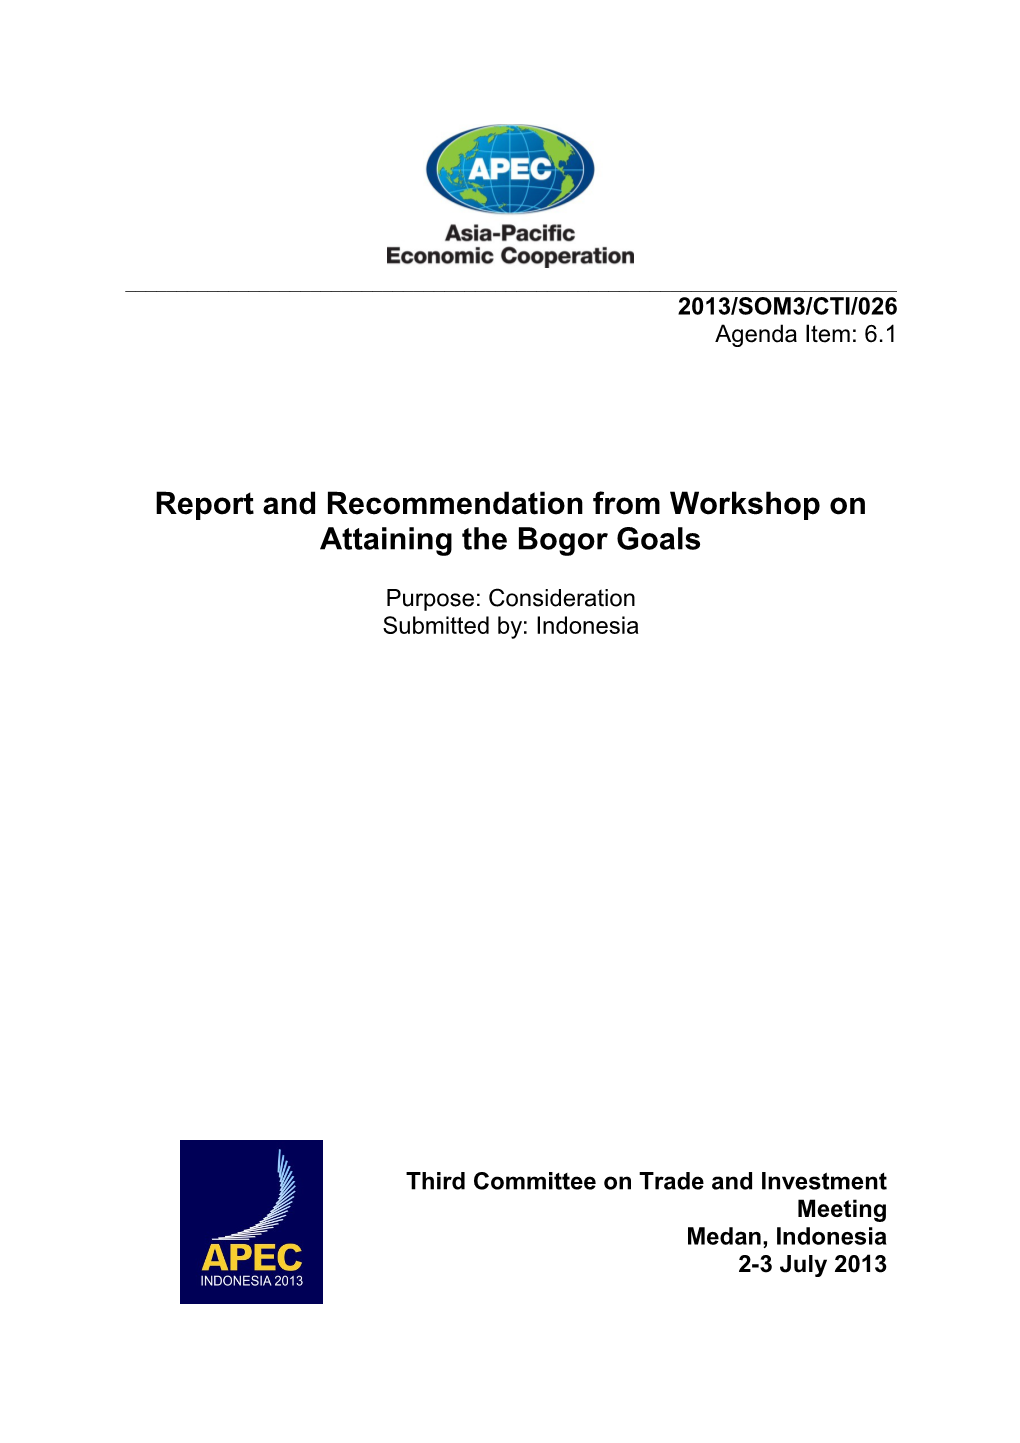 Report and Recommendation from Workshop on Attaining the Bogor Goals